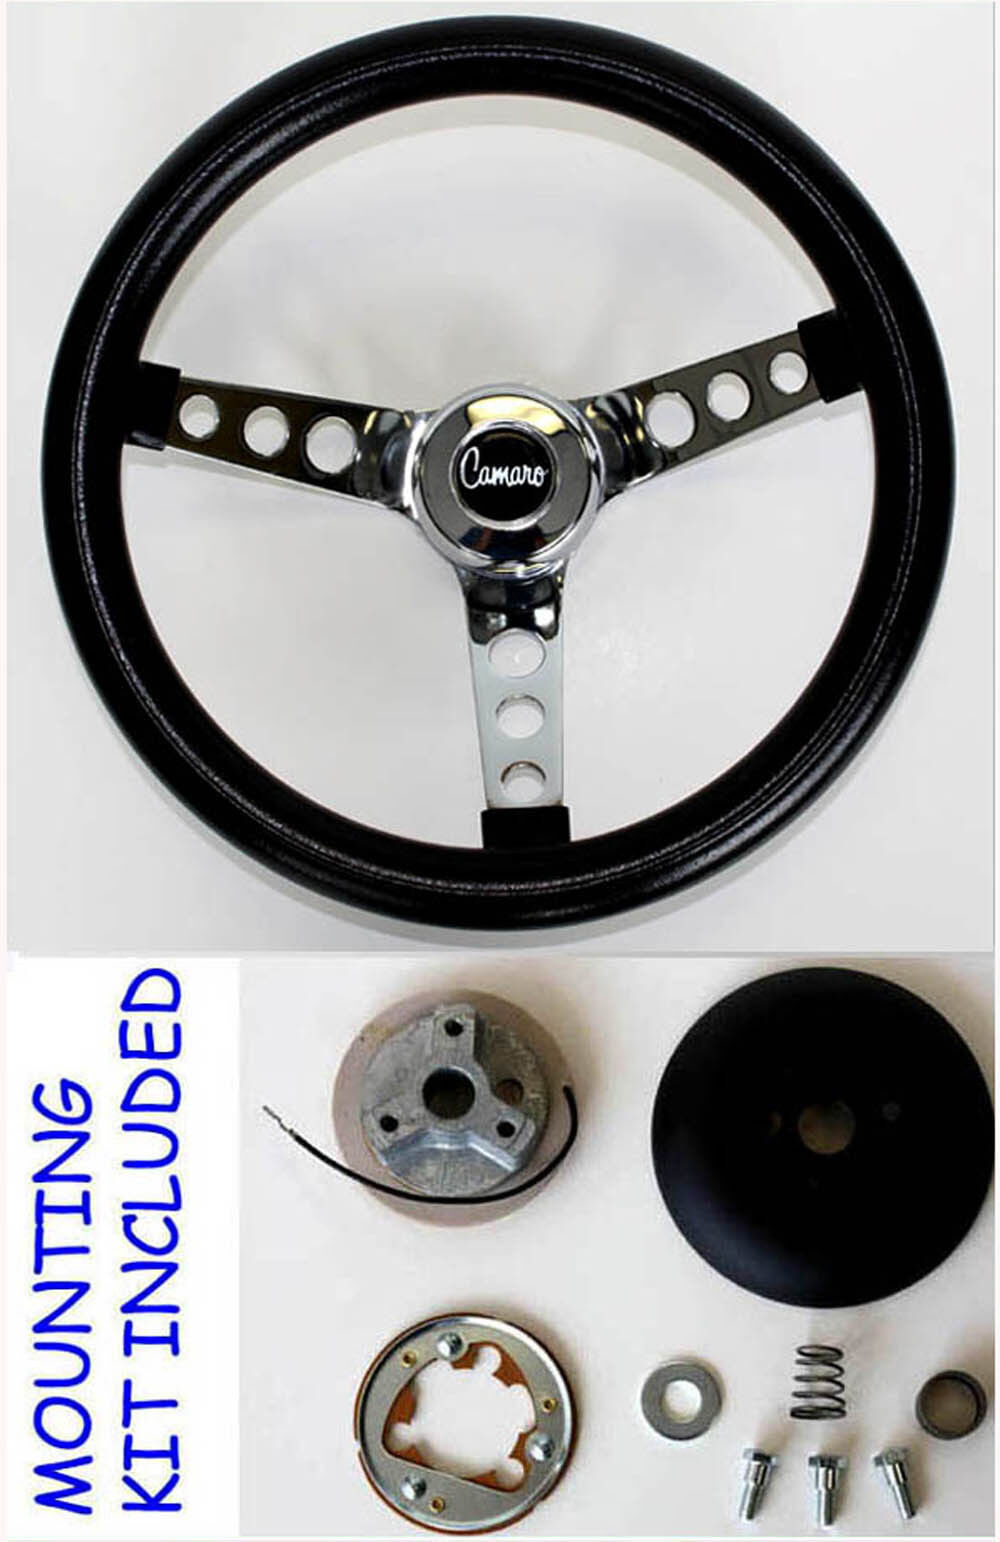 New 1969-1994 Camaro Grant Black and Chrome Steering Wheel 13 1/2 with horn kit